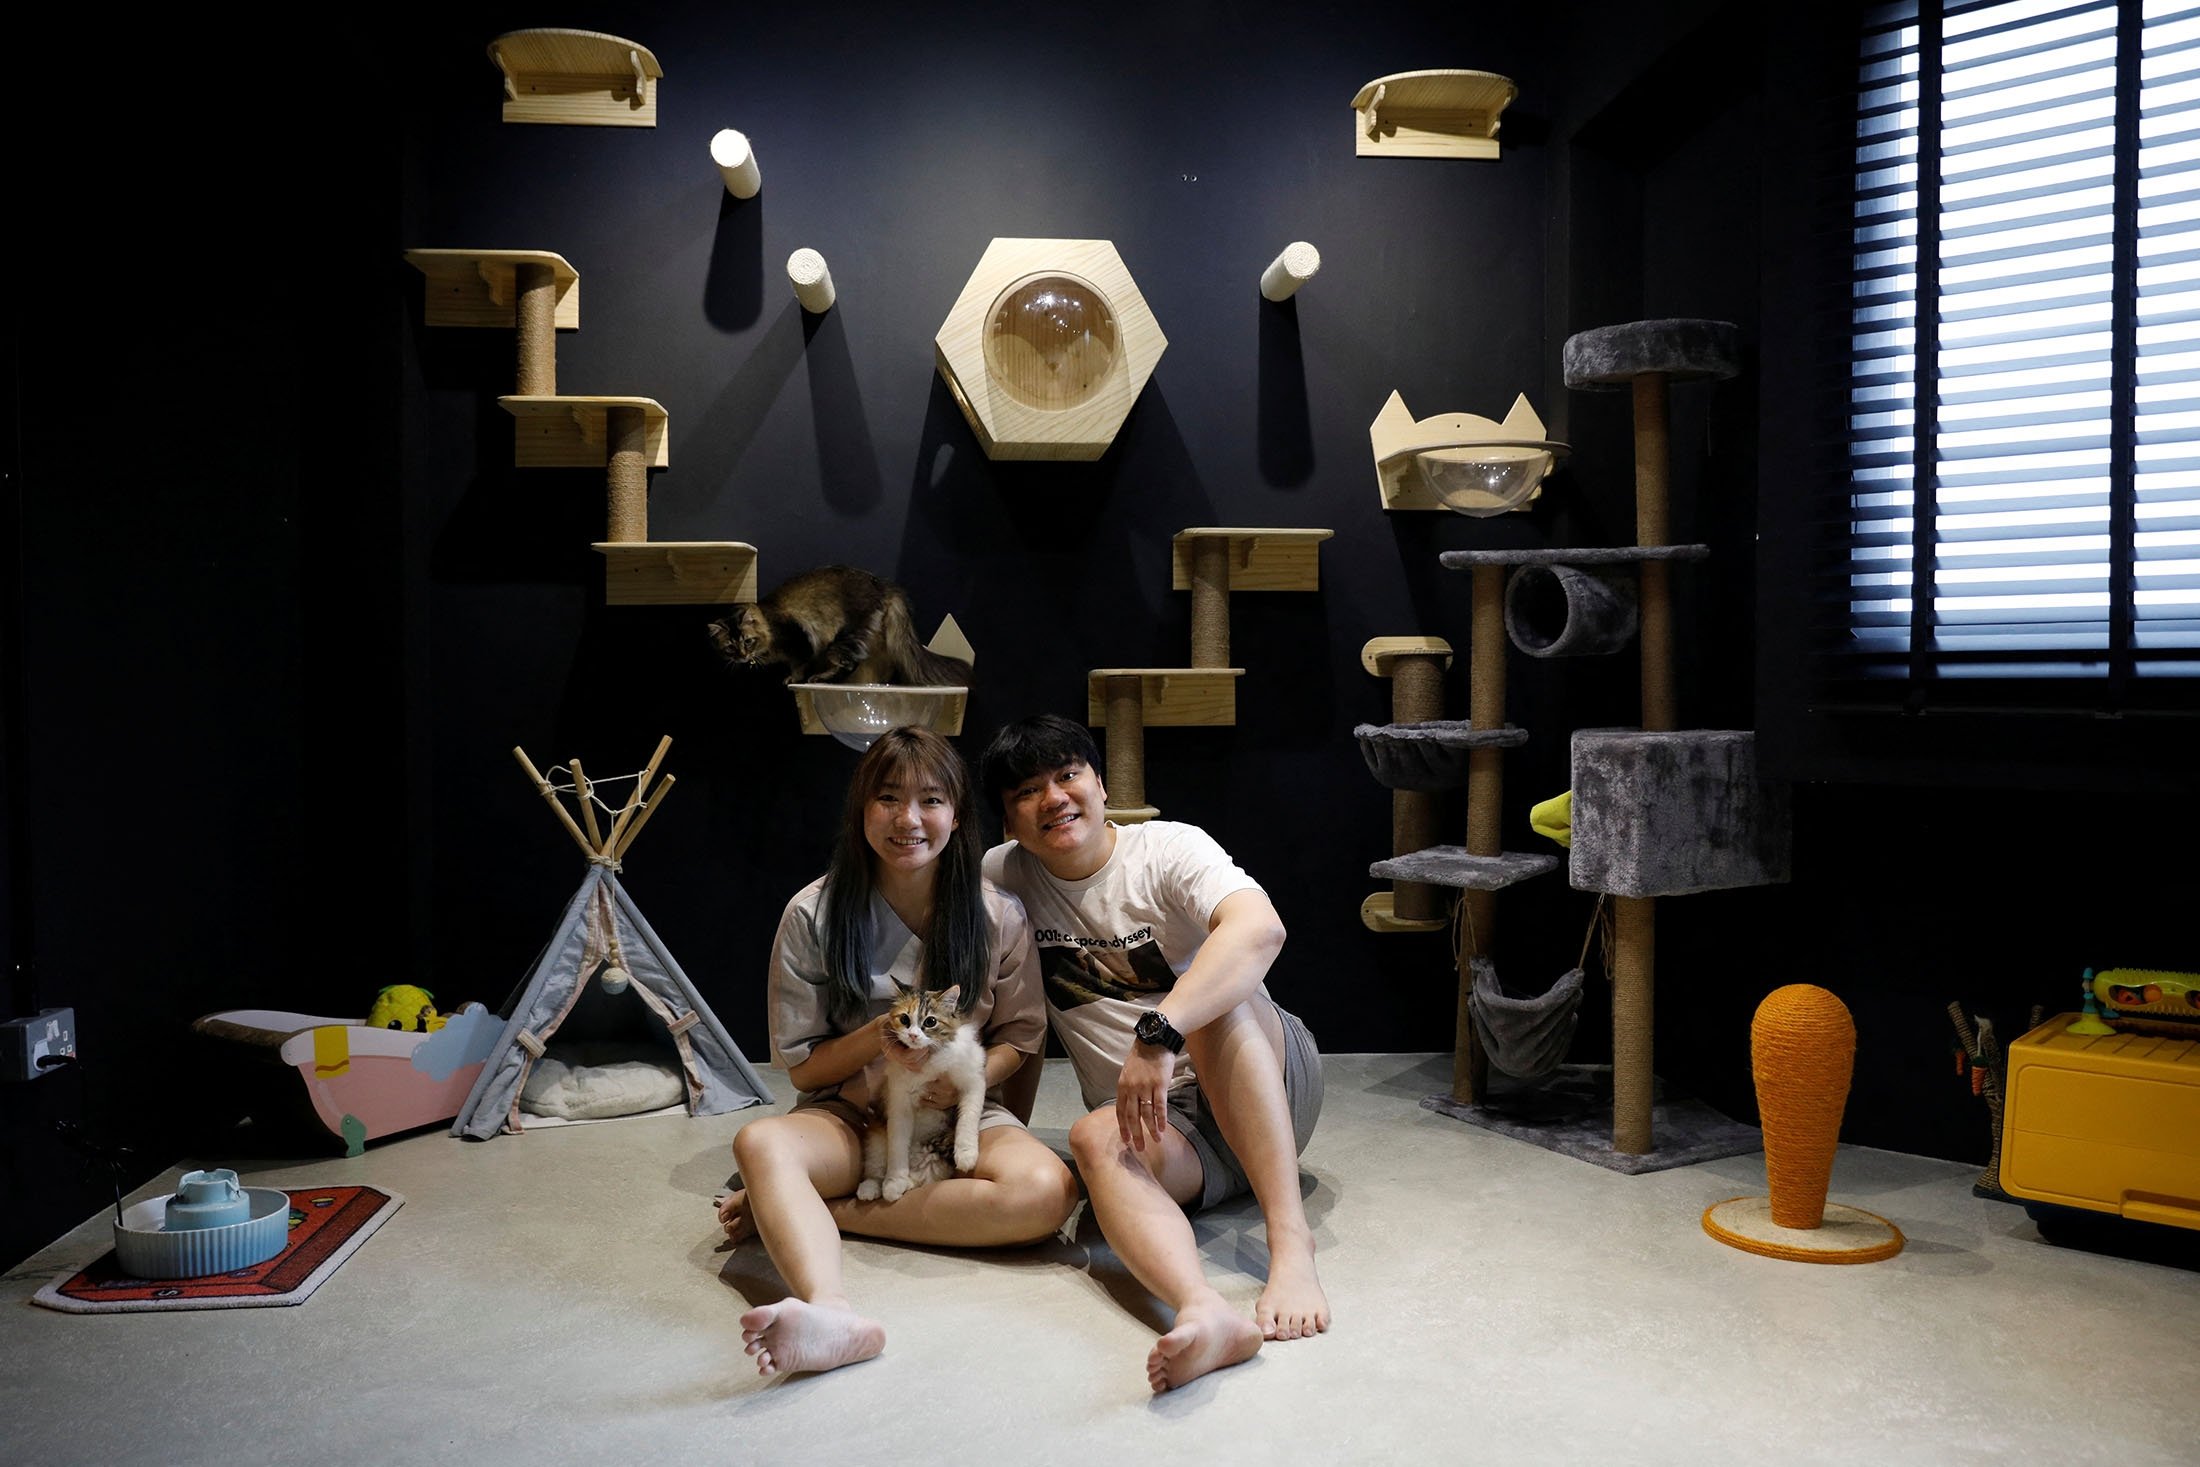 Signmaker Ruvyn Tng, 31, and his wife, home baker Phoebe, 28, pose with their cats Kaala and Mocha in their cat cafe-inspired, 21-year-old resale four-room public housing apartment in Singapore, Aug. 30, 2021. (Reuters Photo)